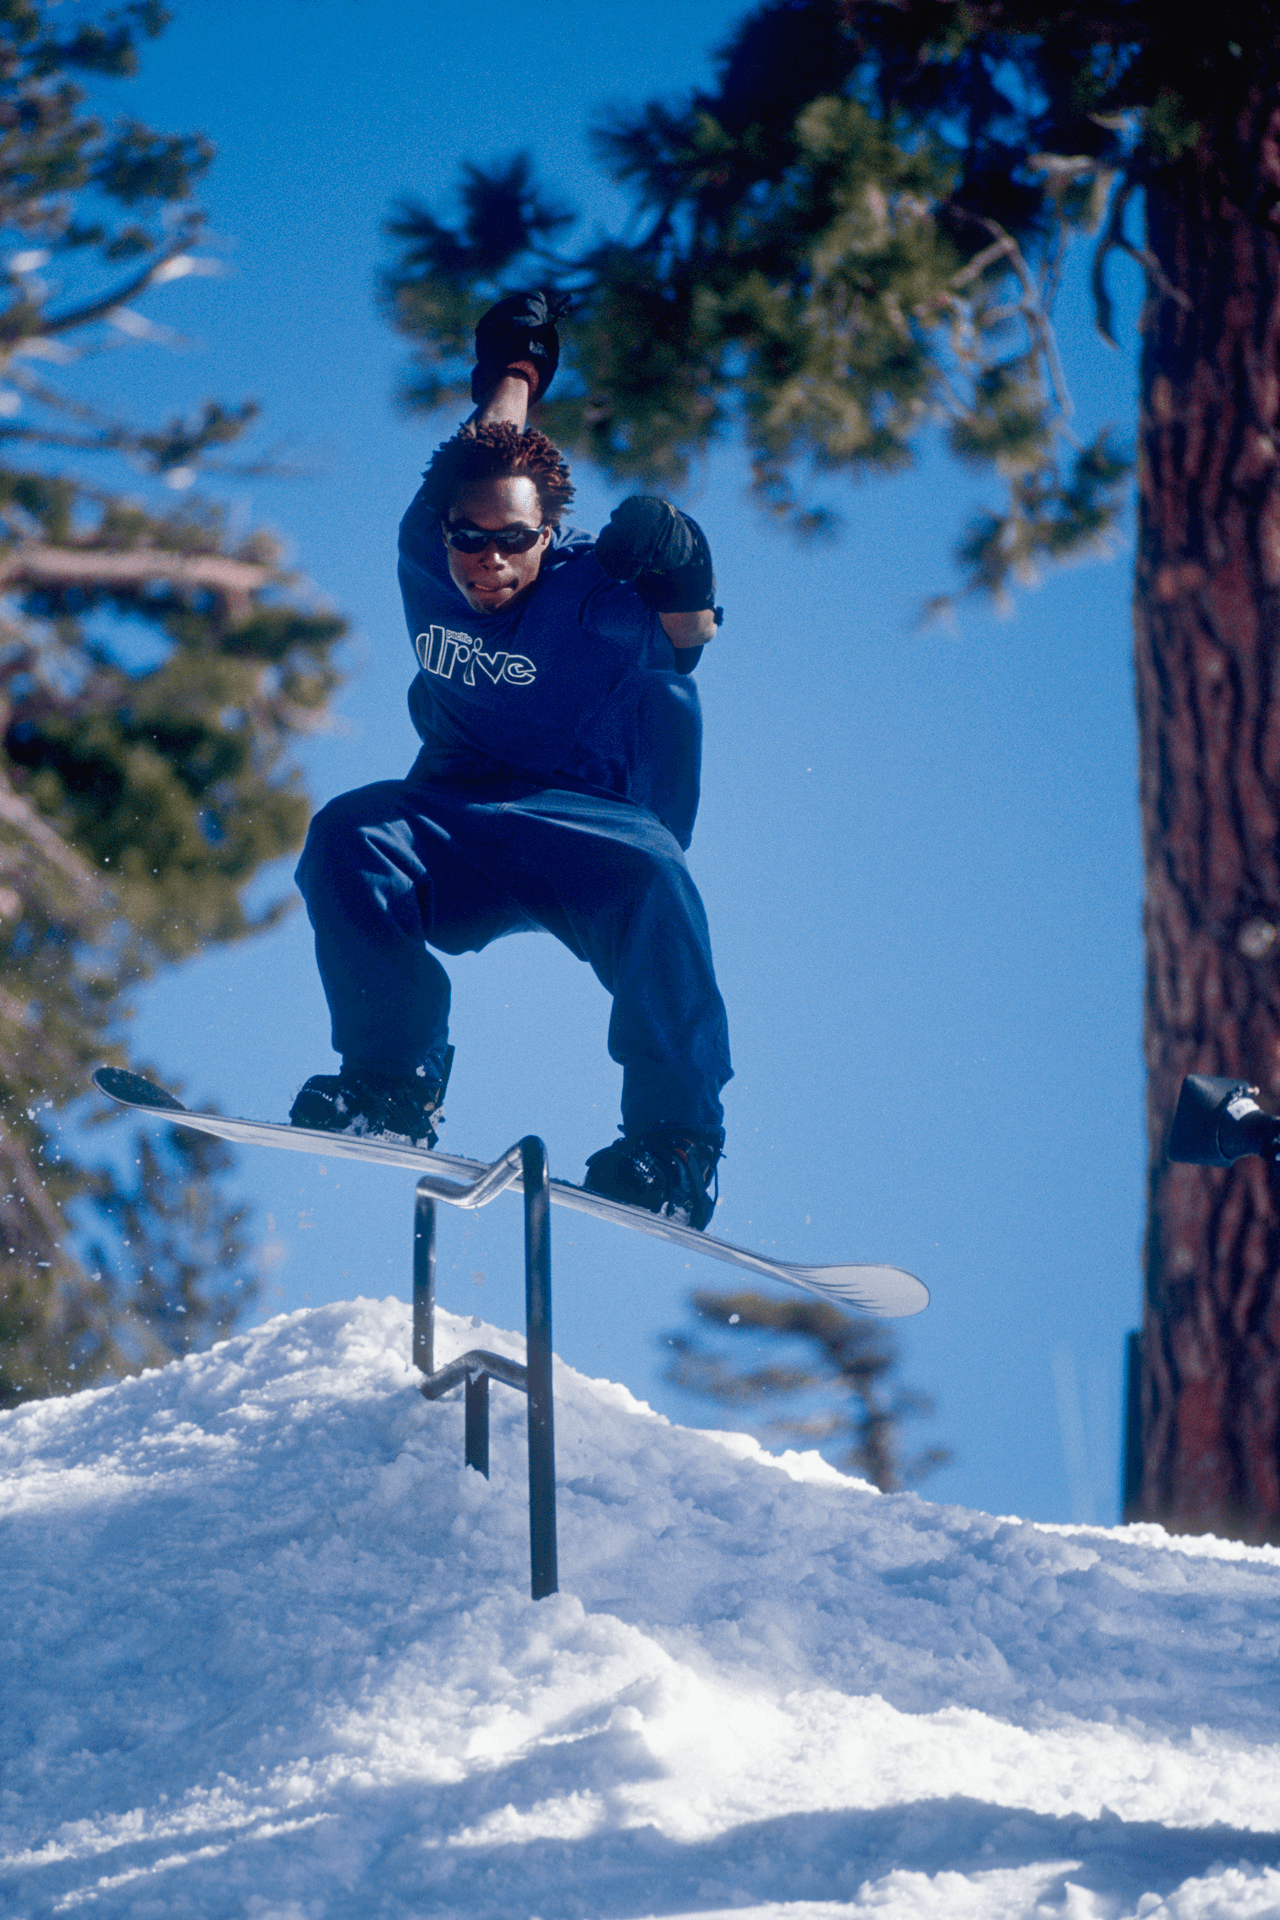 Classic Russell Winfield rail shot from 1993